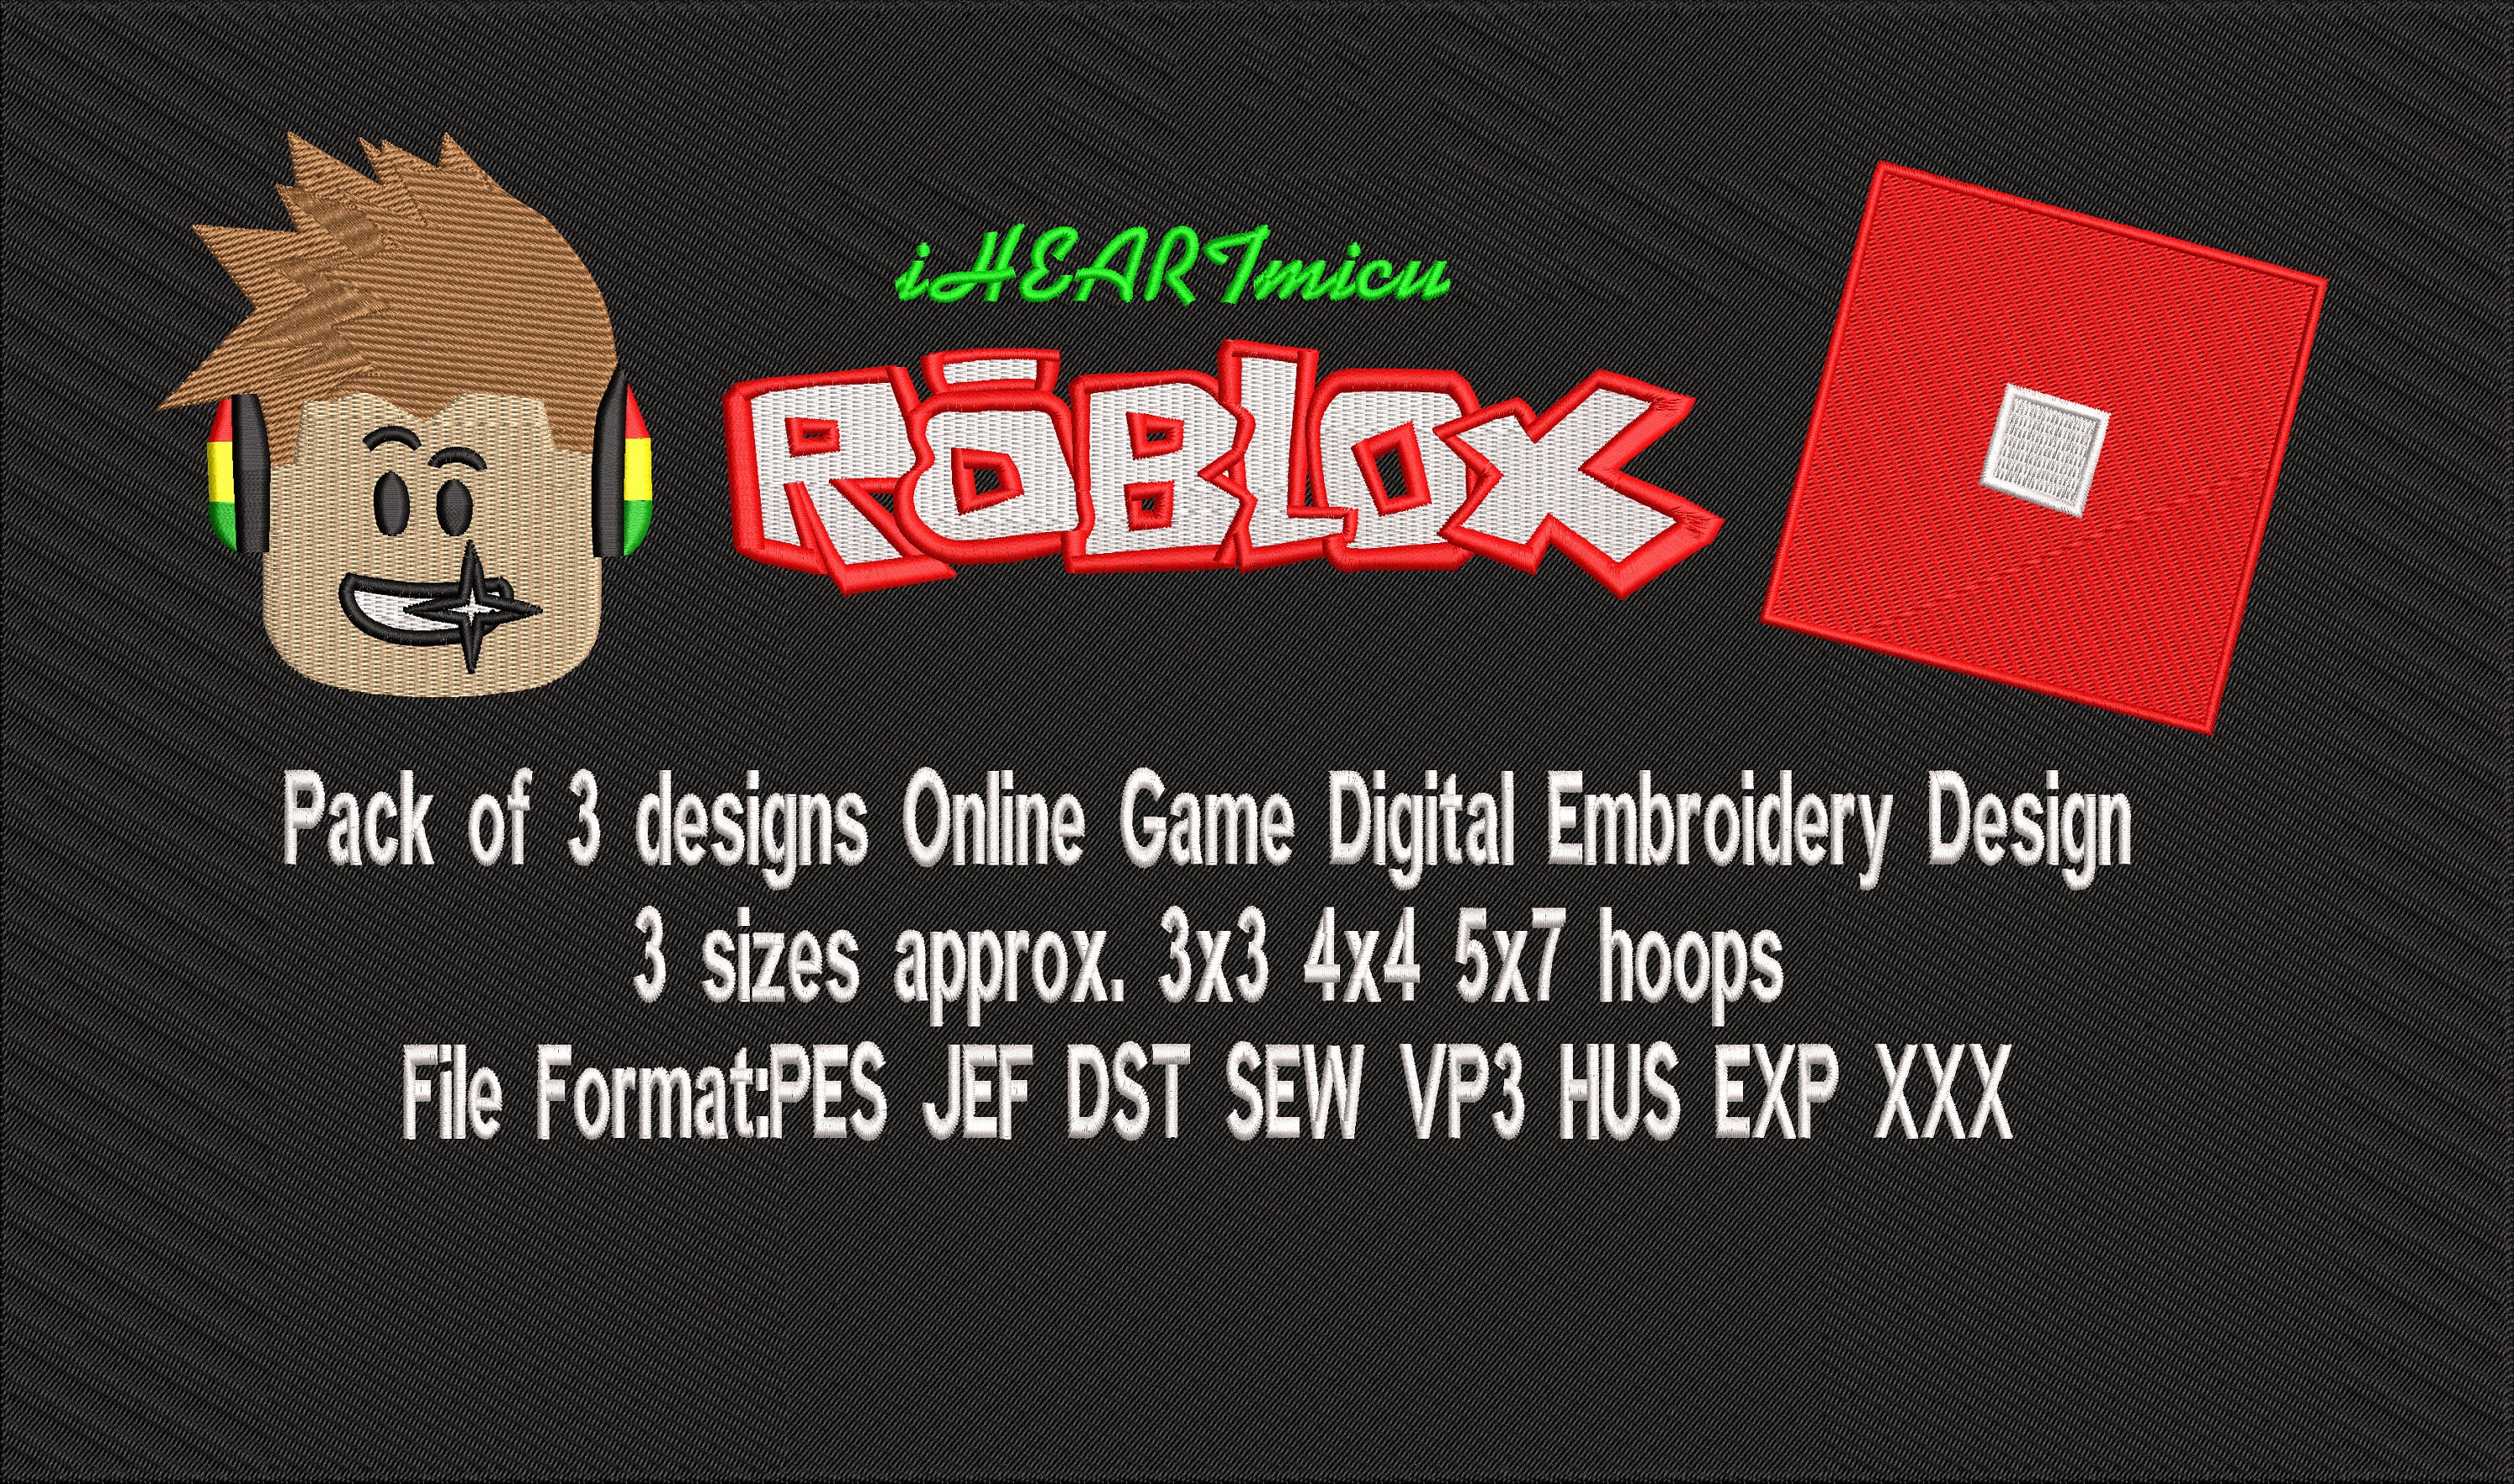 Roblox Girl Seamless Pattern for your Gamer Girl. Roblox Pattern for  crafting, fabrics, scrapbooking, etc.